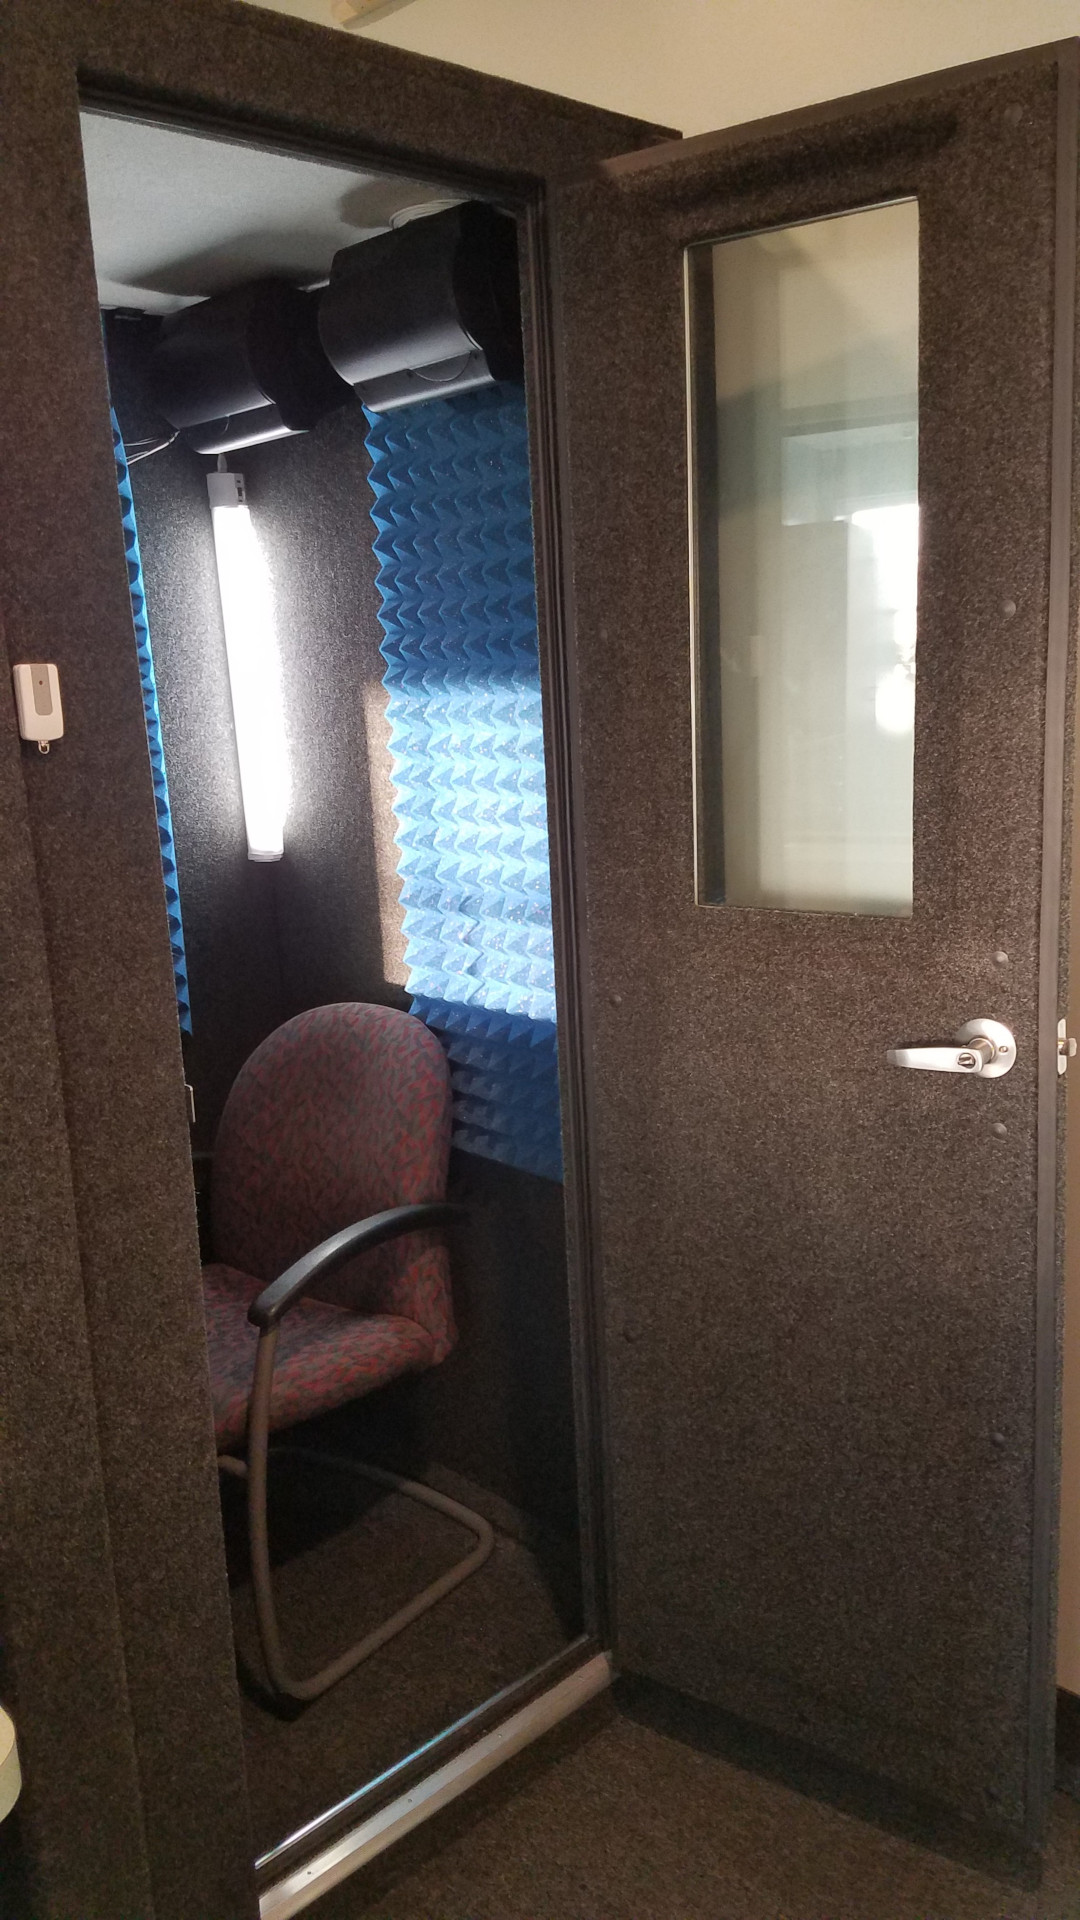 audio booth with chair inside